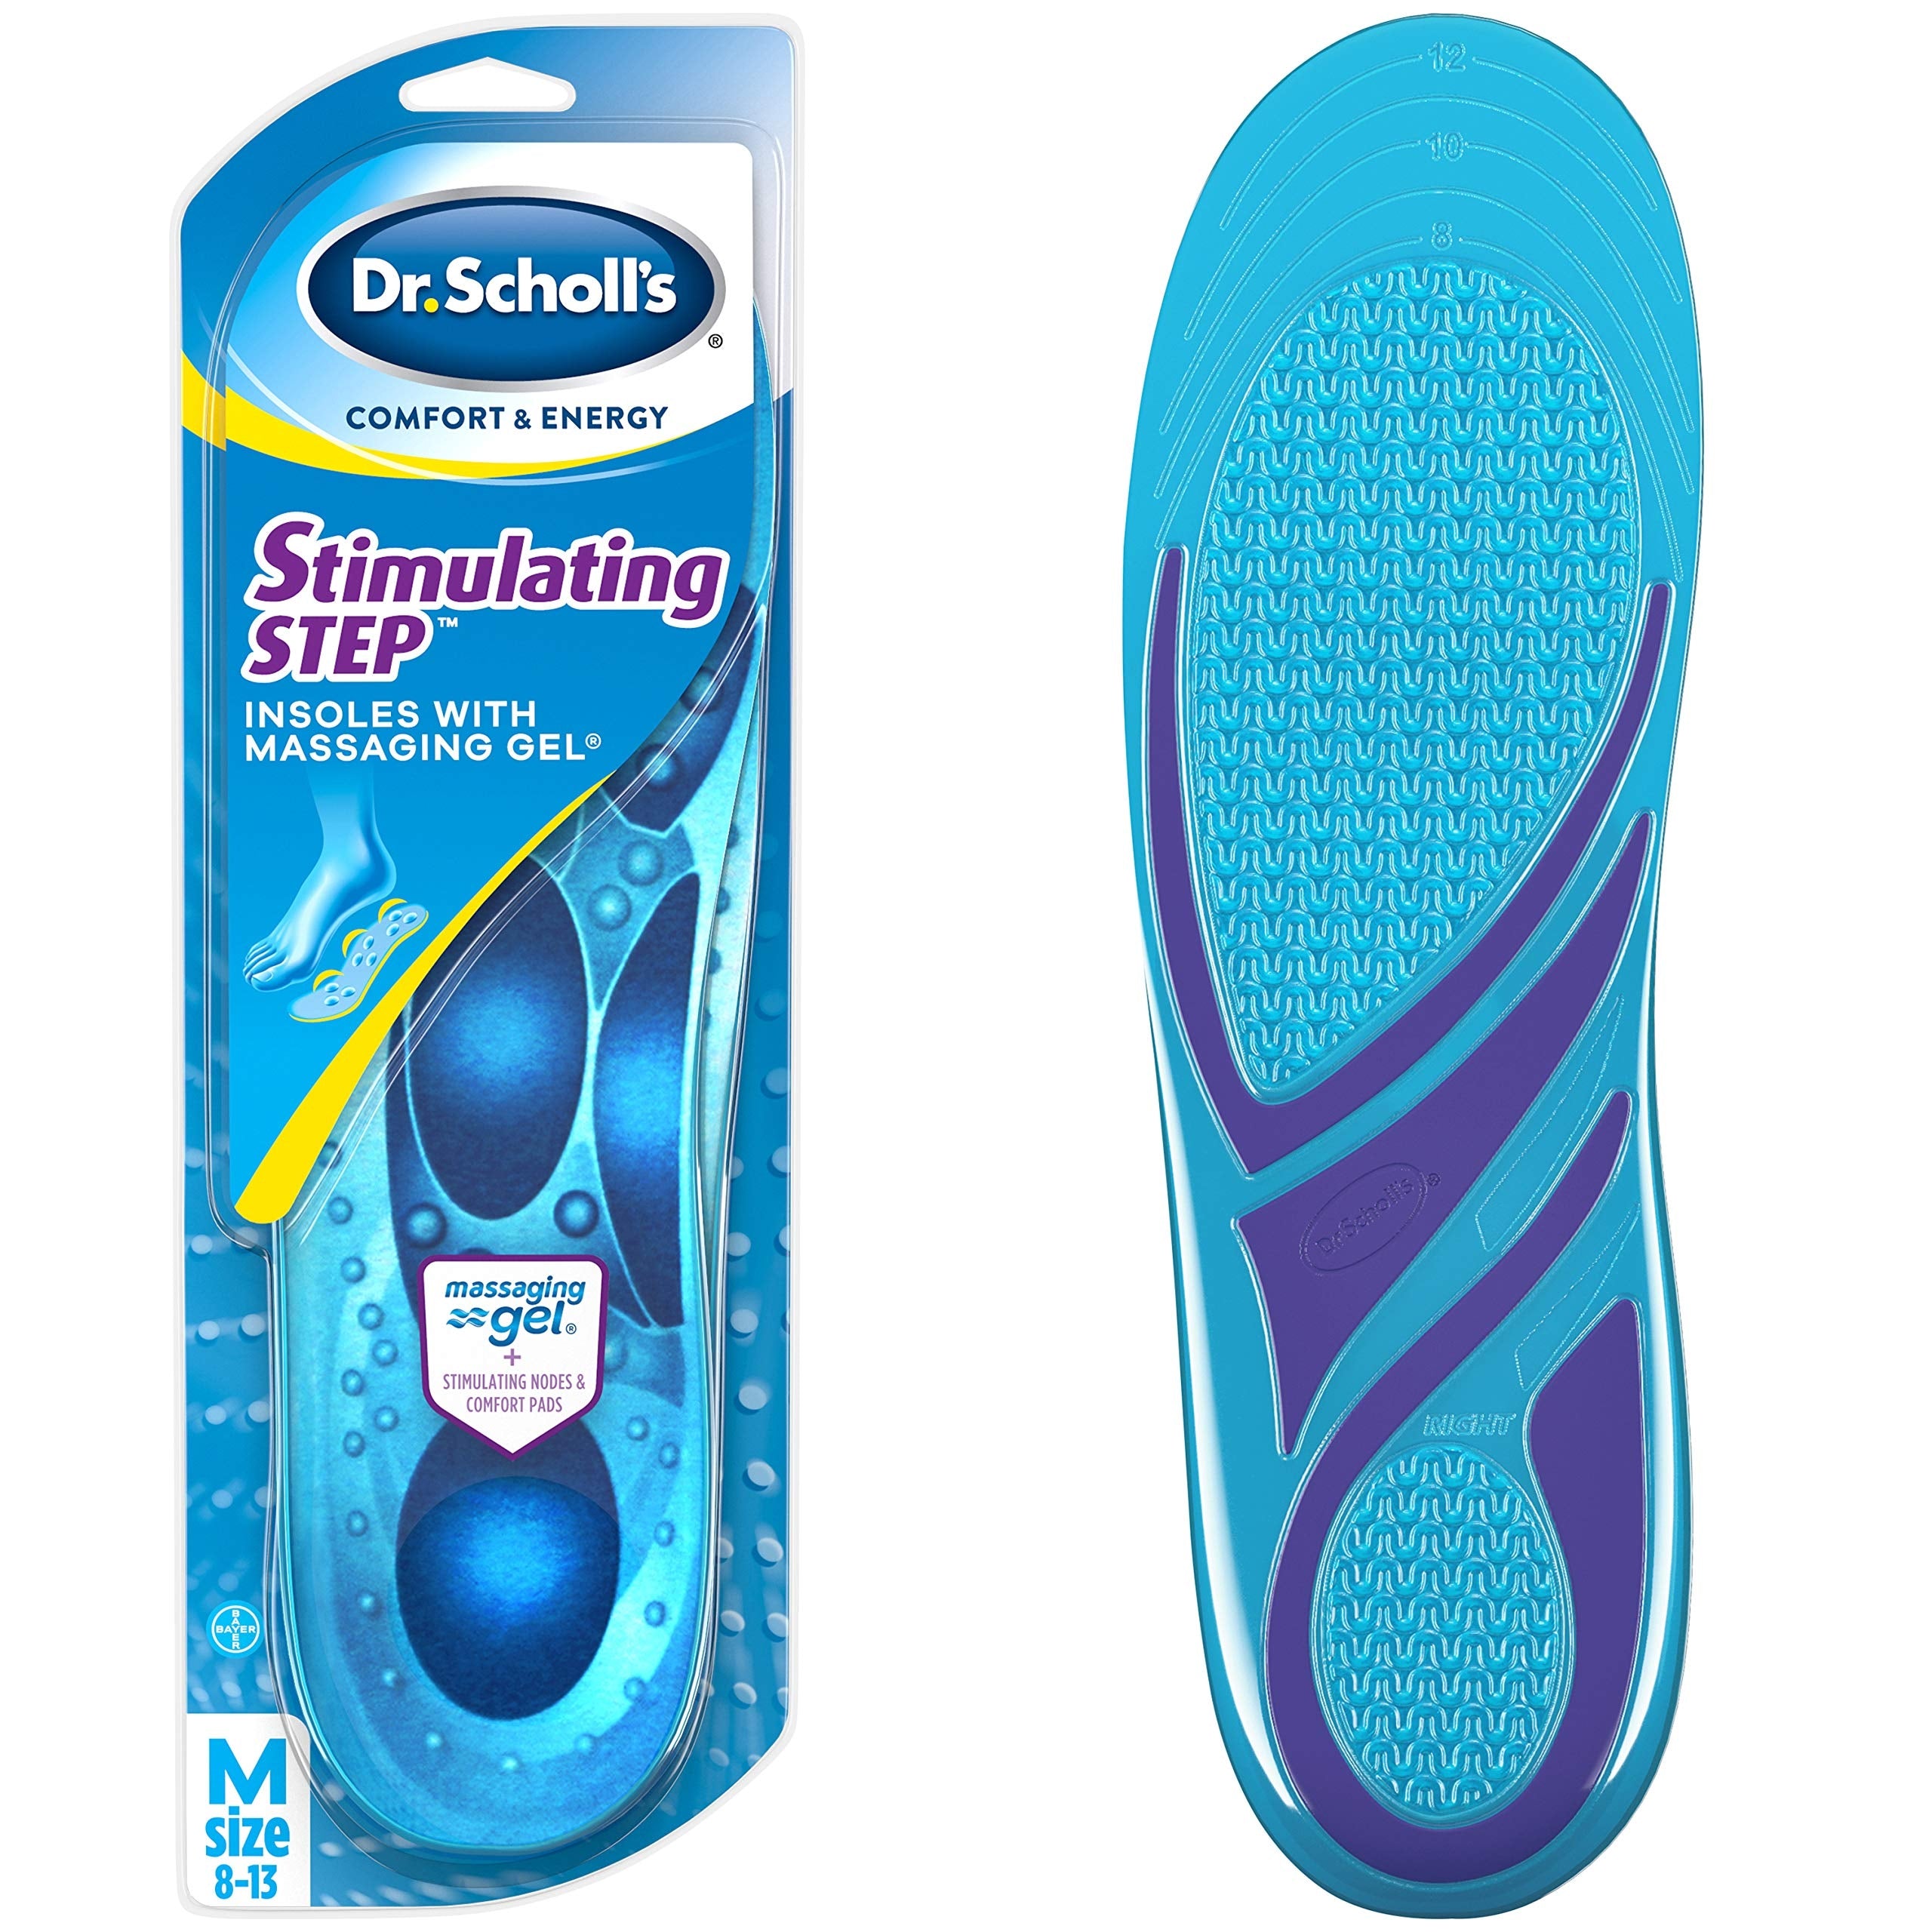 Dr. Scholl's Comfort & Energy Stimulating Step Insoles for Men Size 8-13 - 1ct/12pk